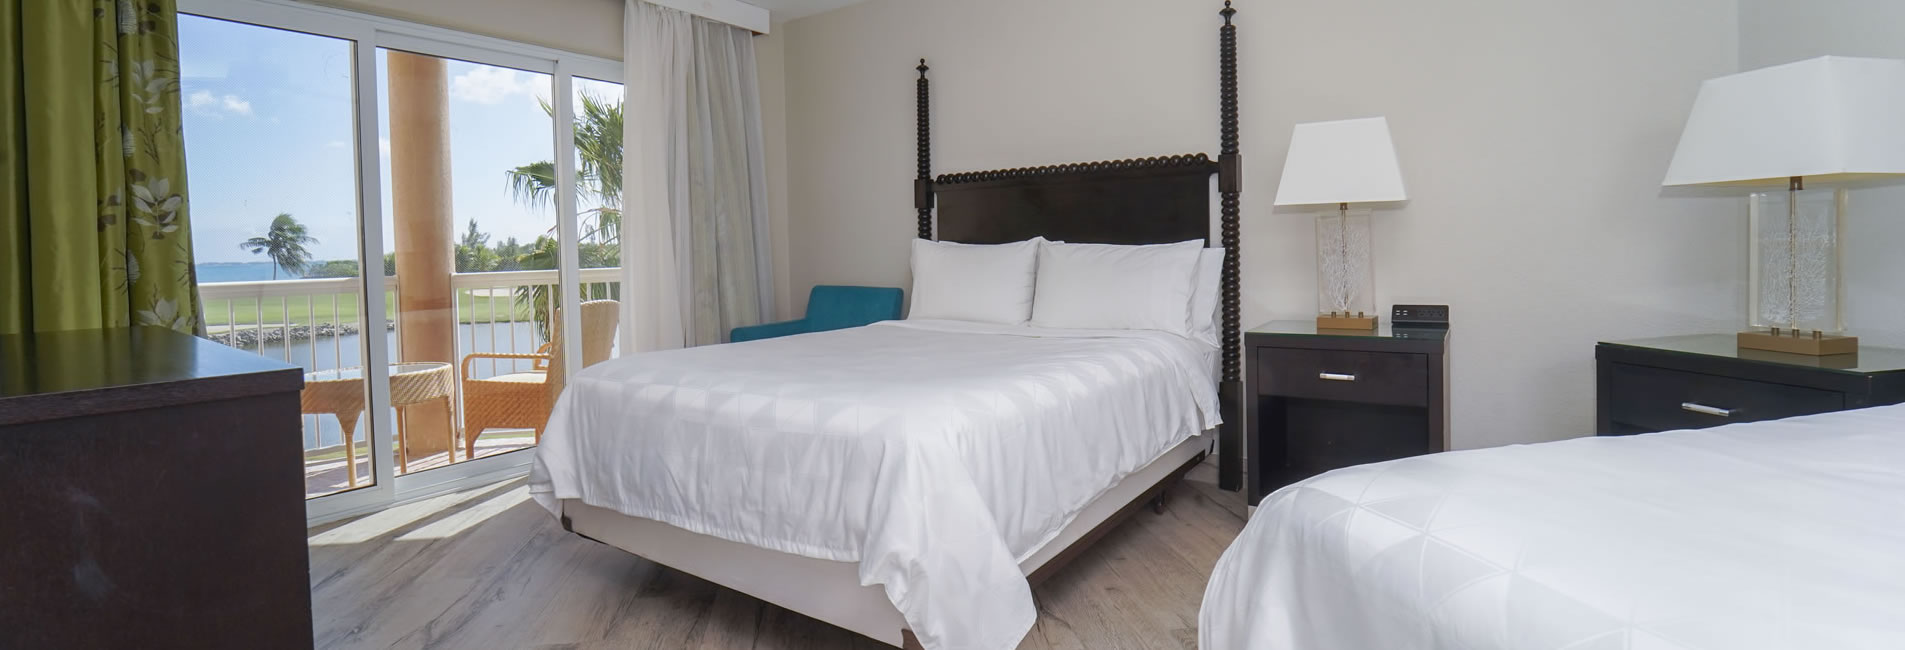 Comfortable hotel rooms in Grand Cayman